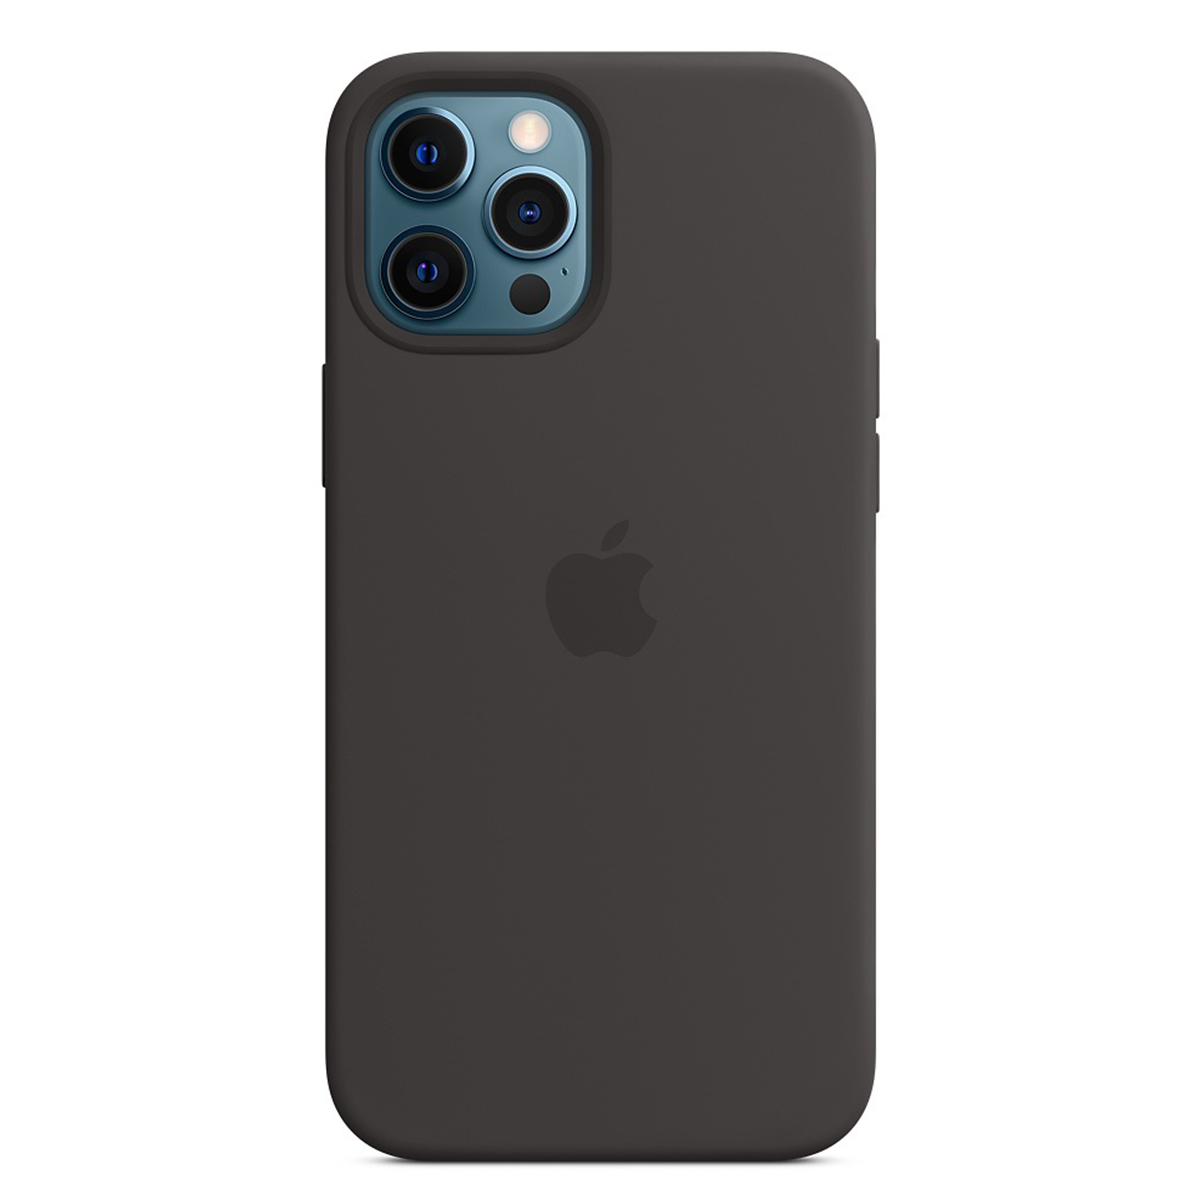 iPhone 12 Pro Max Silicone Case with MagSafe - Black